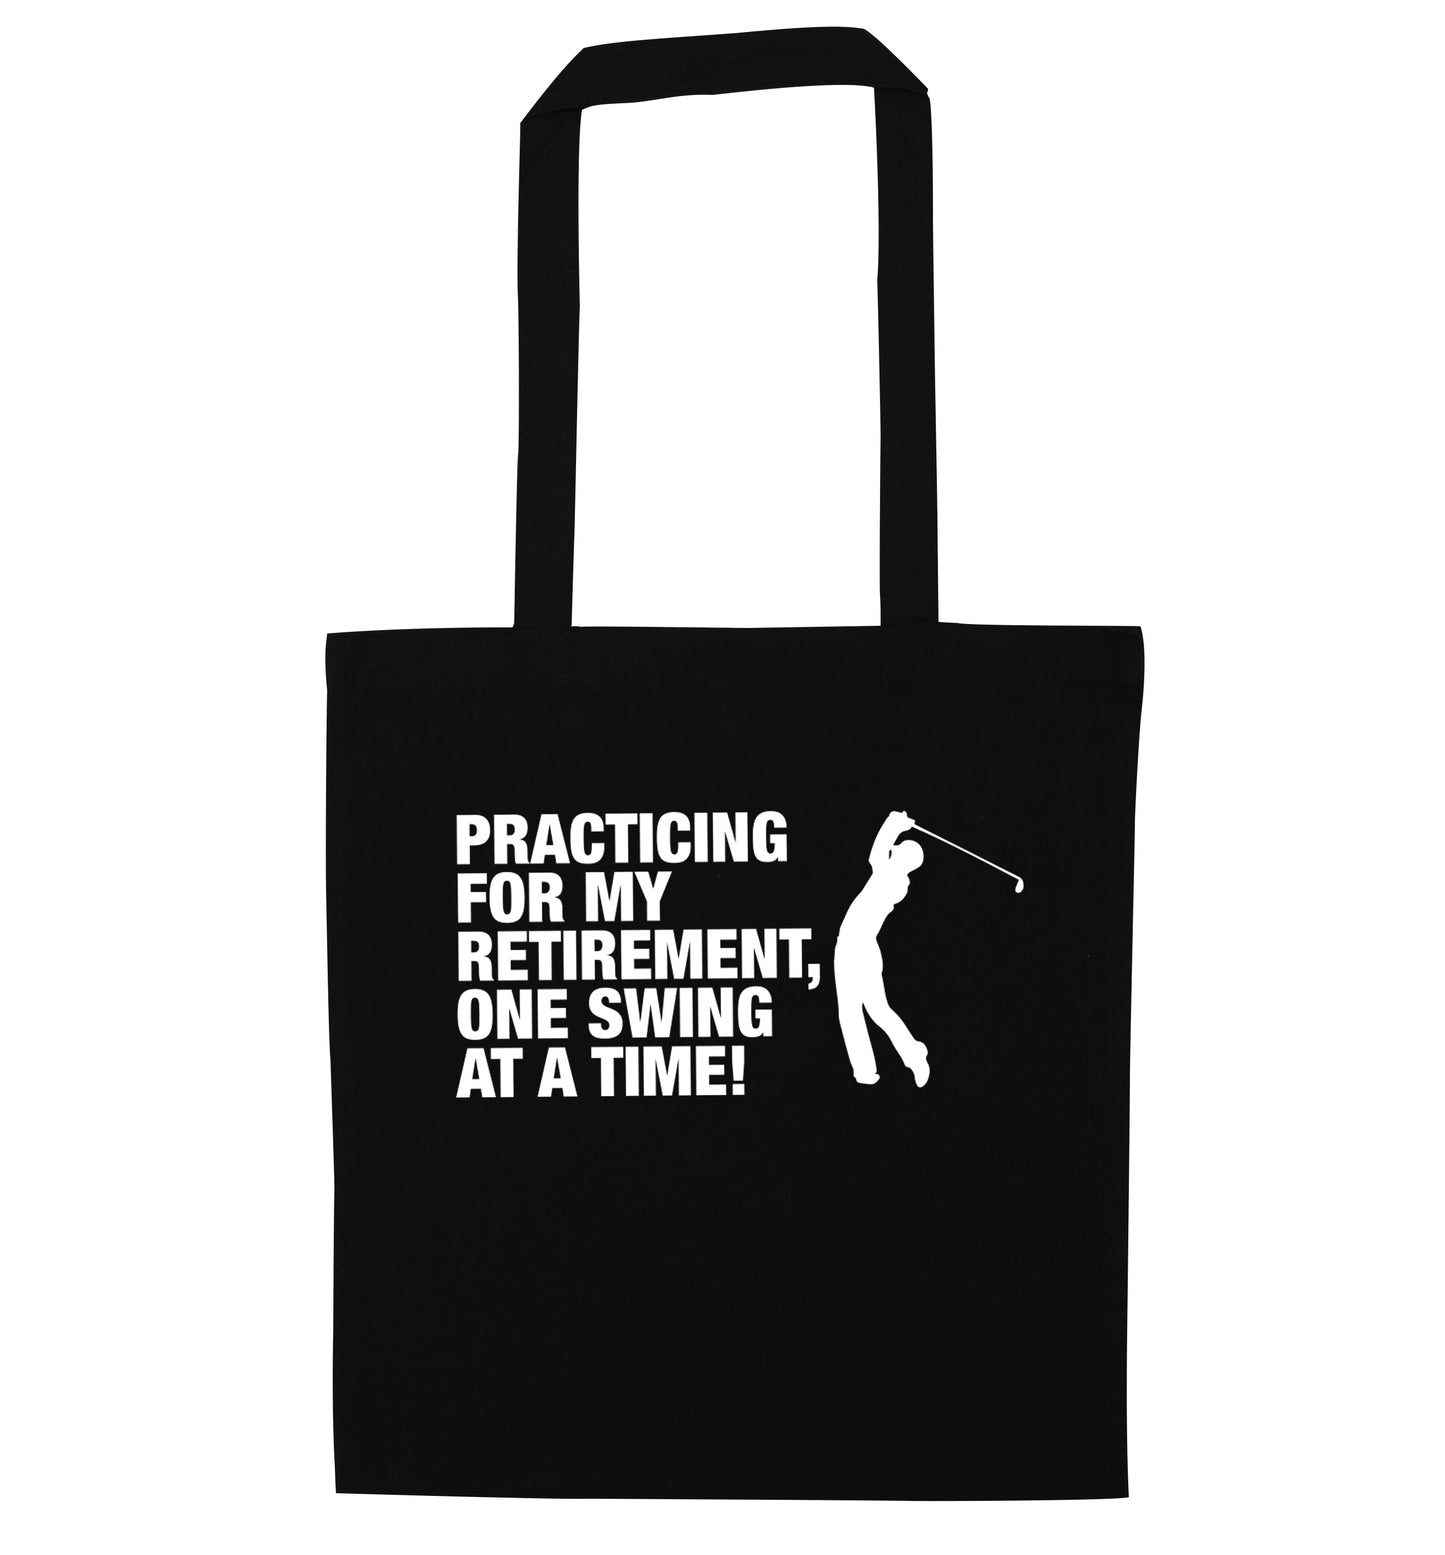 Practicing for my retirement one swing at a time black tote bag